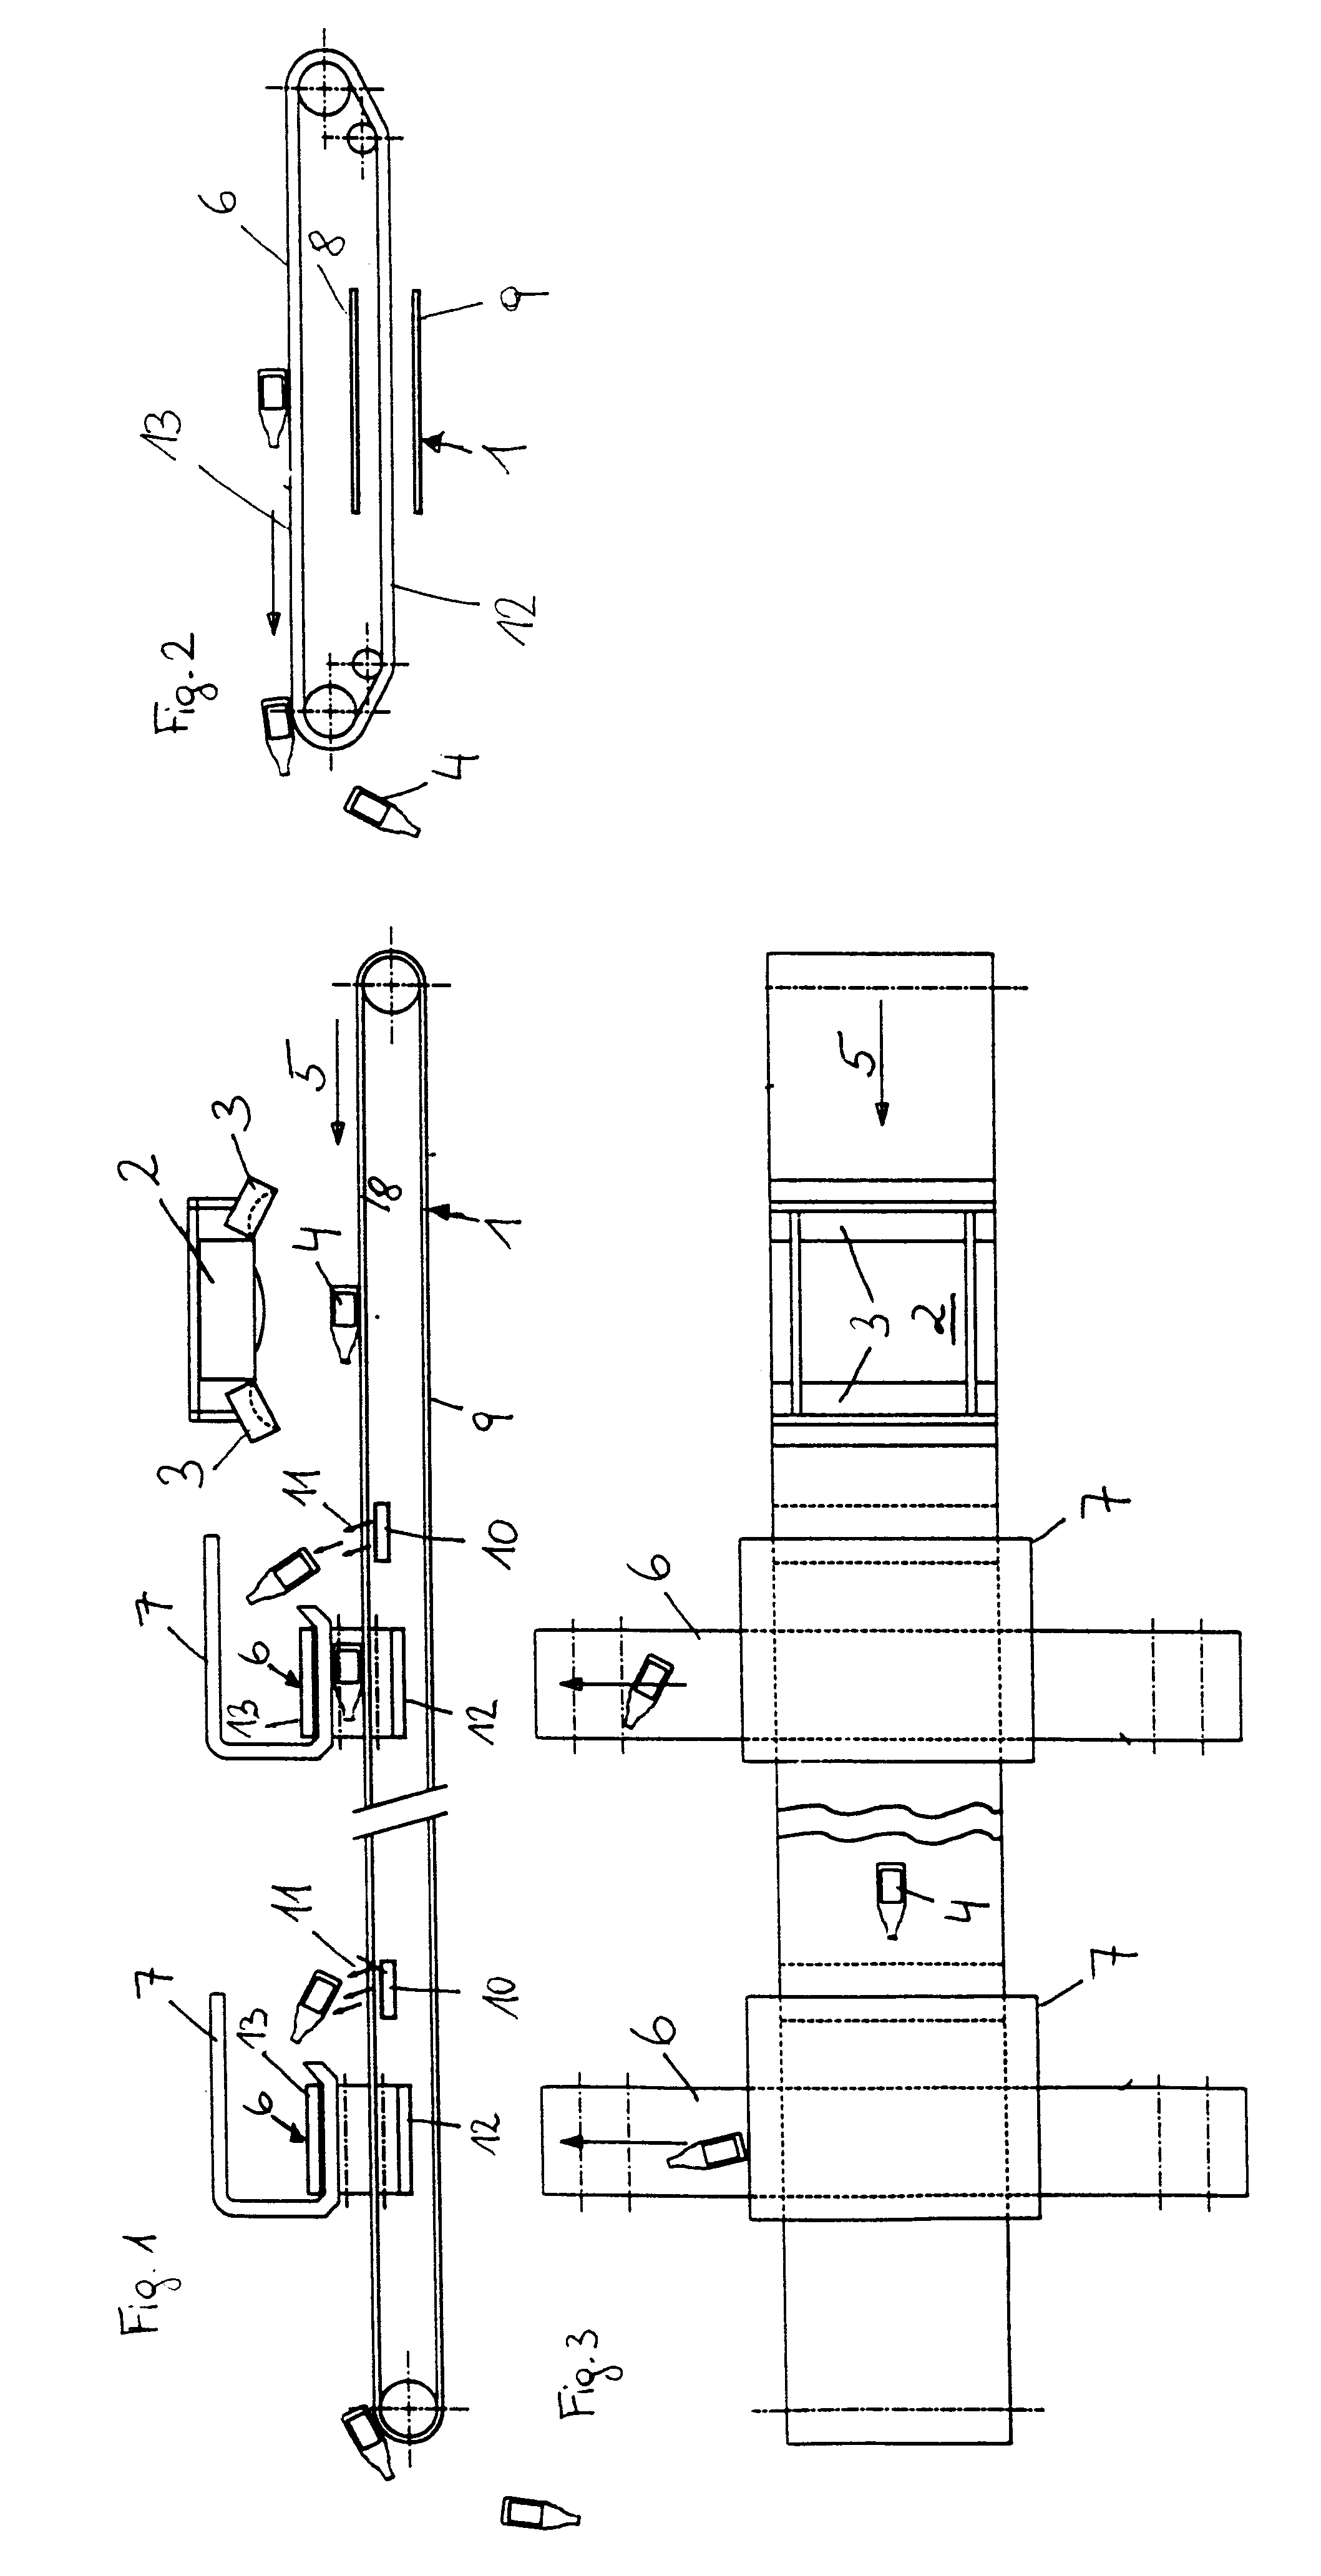 Apparatus for sorting waste materials